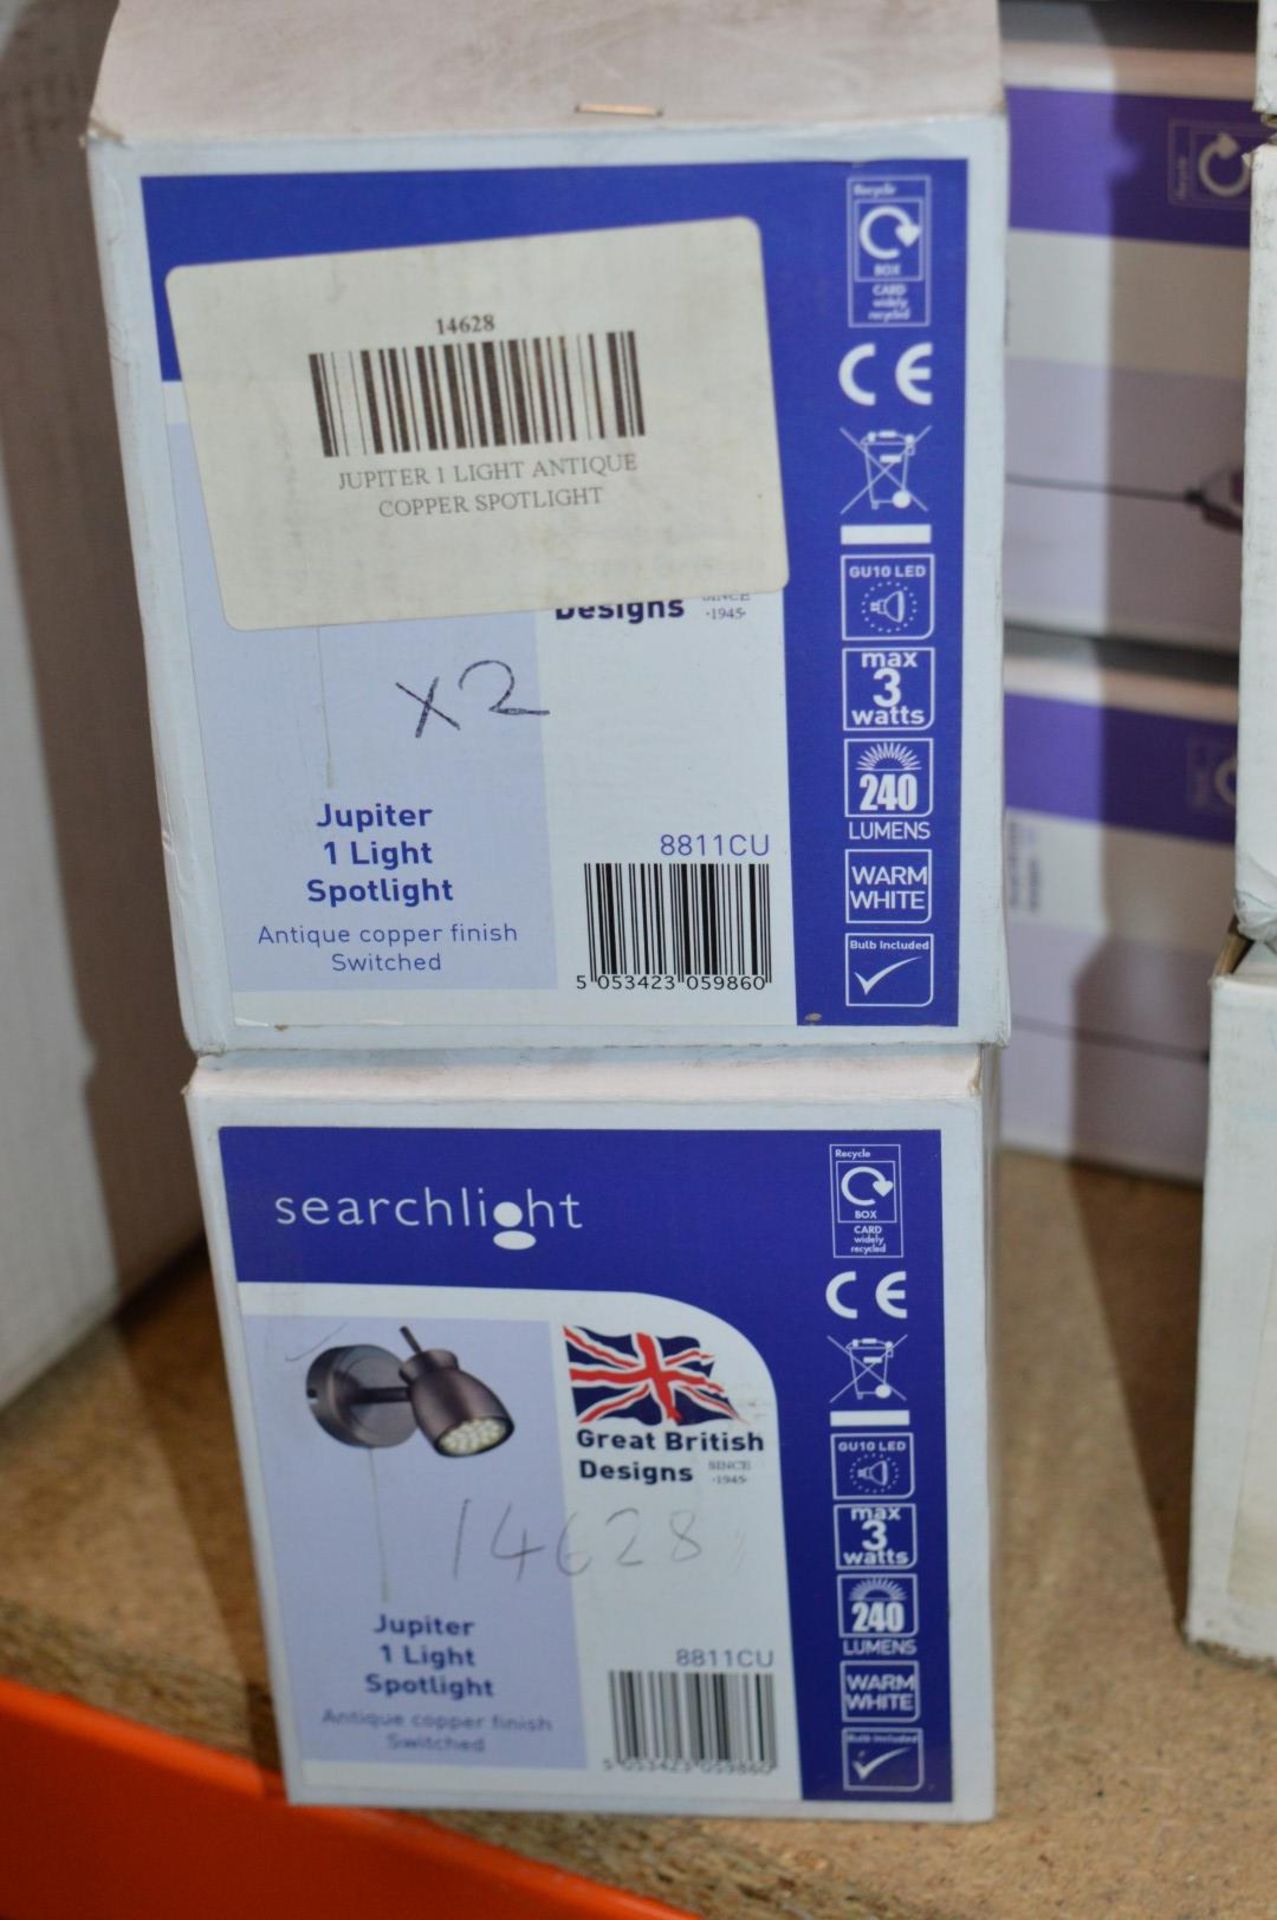 2 x Searchlight Jupiter 1 Light Spotlights - Product Code 8811CU - New Boxed Stock - CL323 - REF: H5